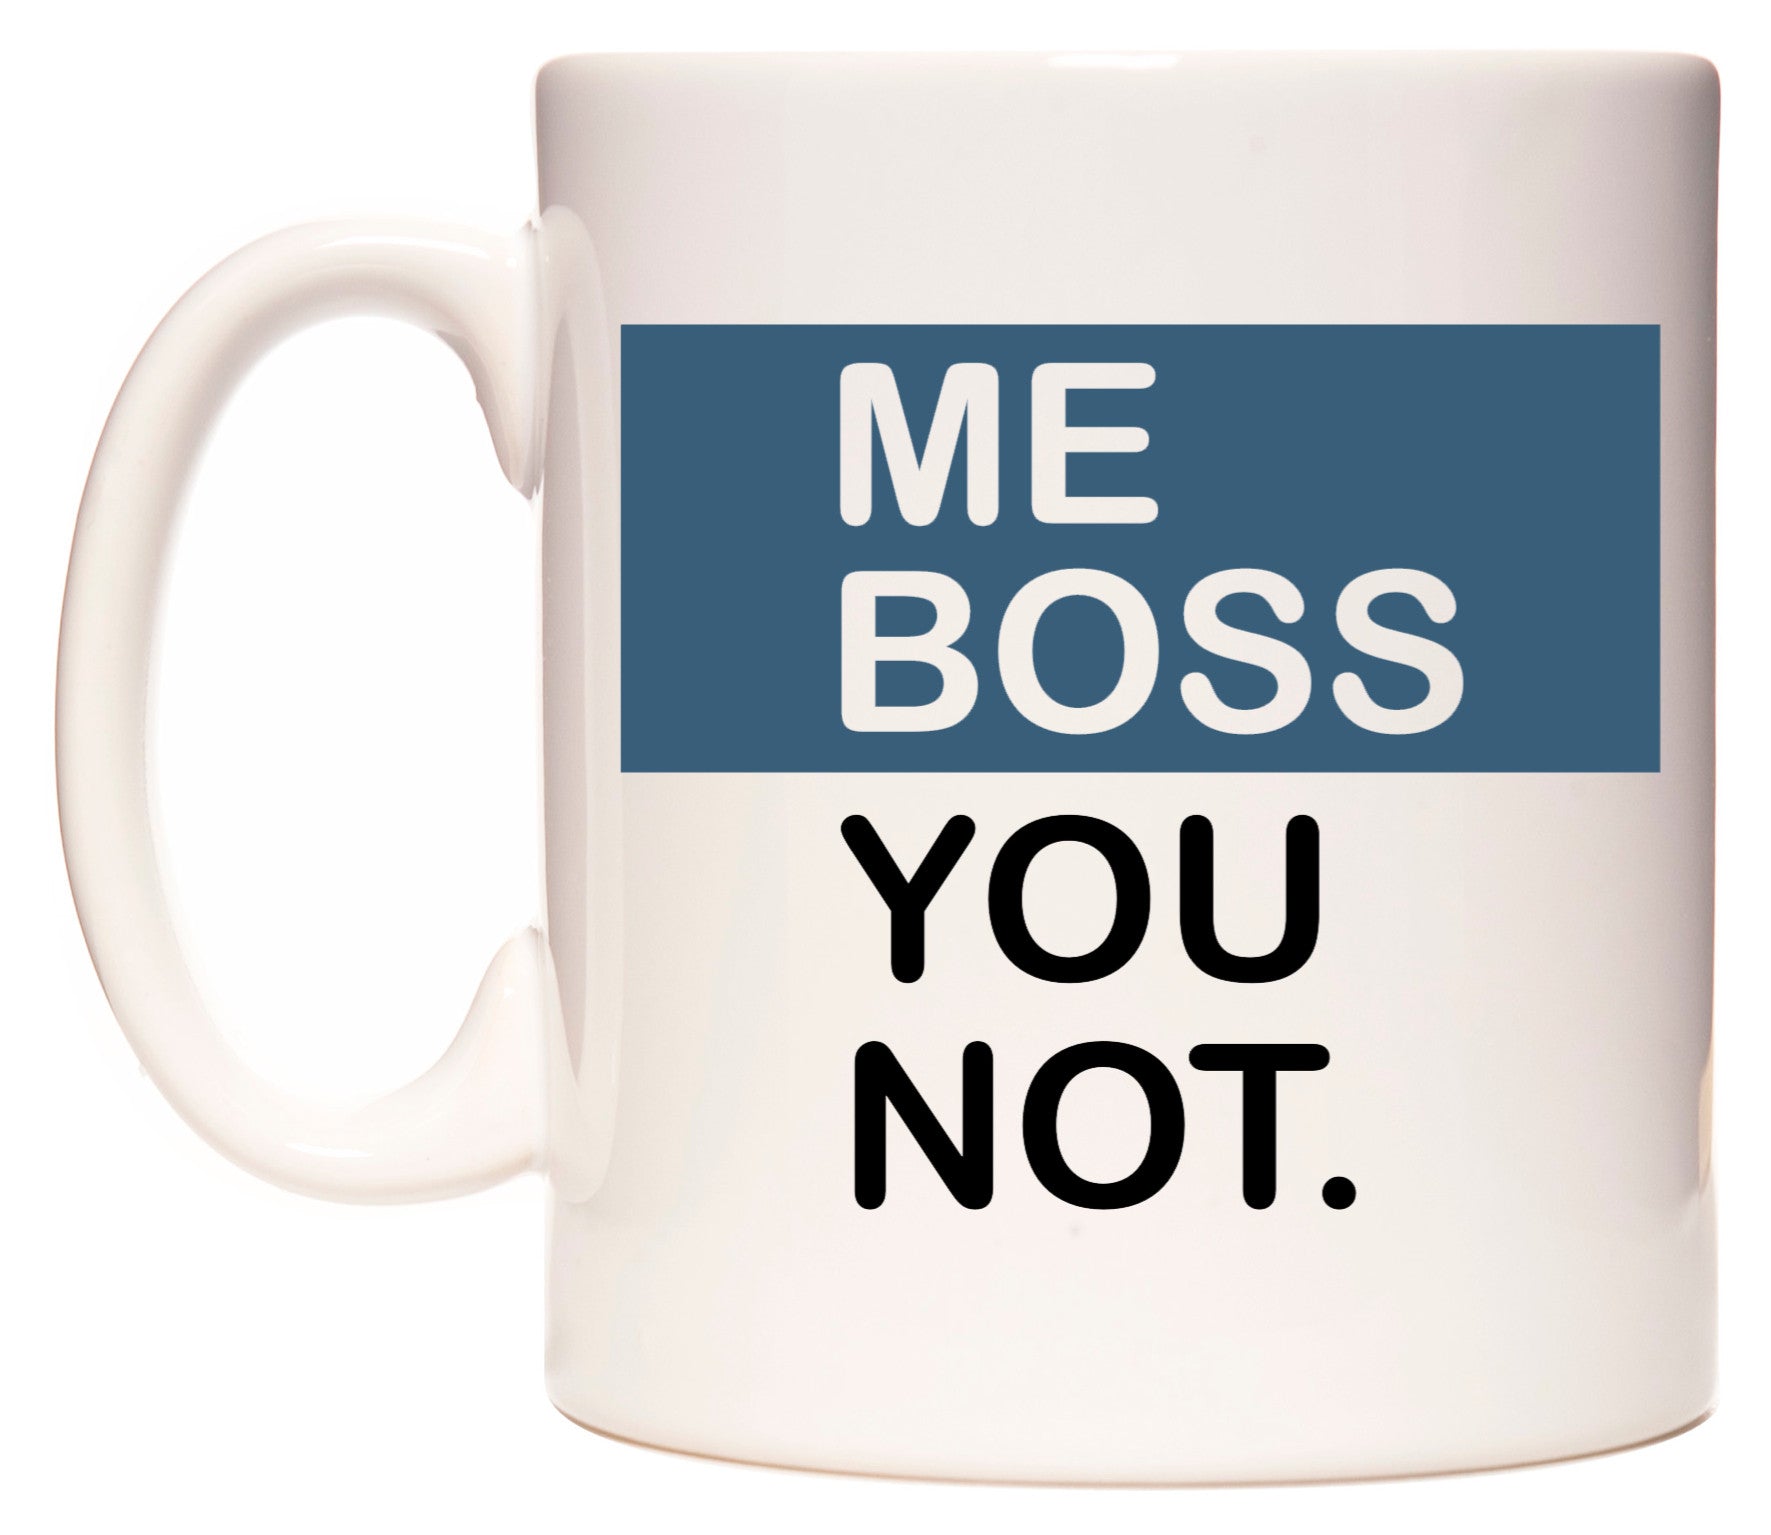 This mug features Me Boss You Not